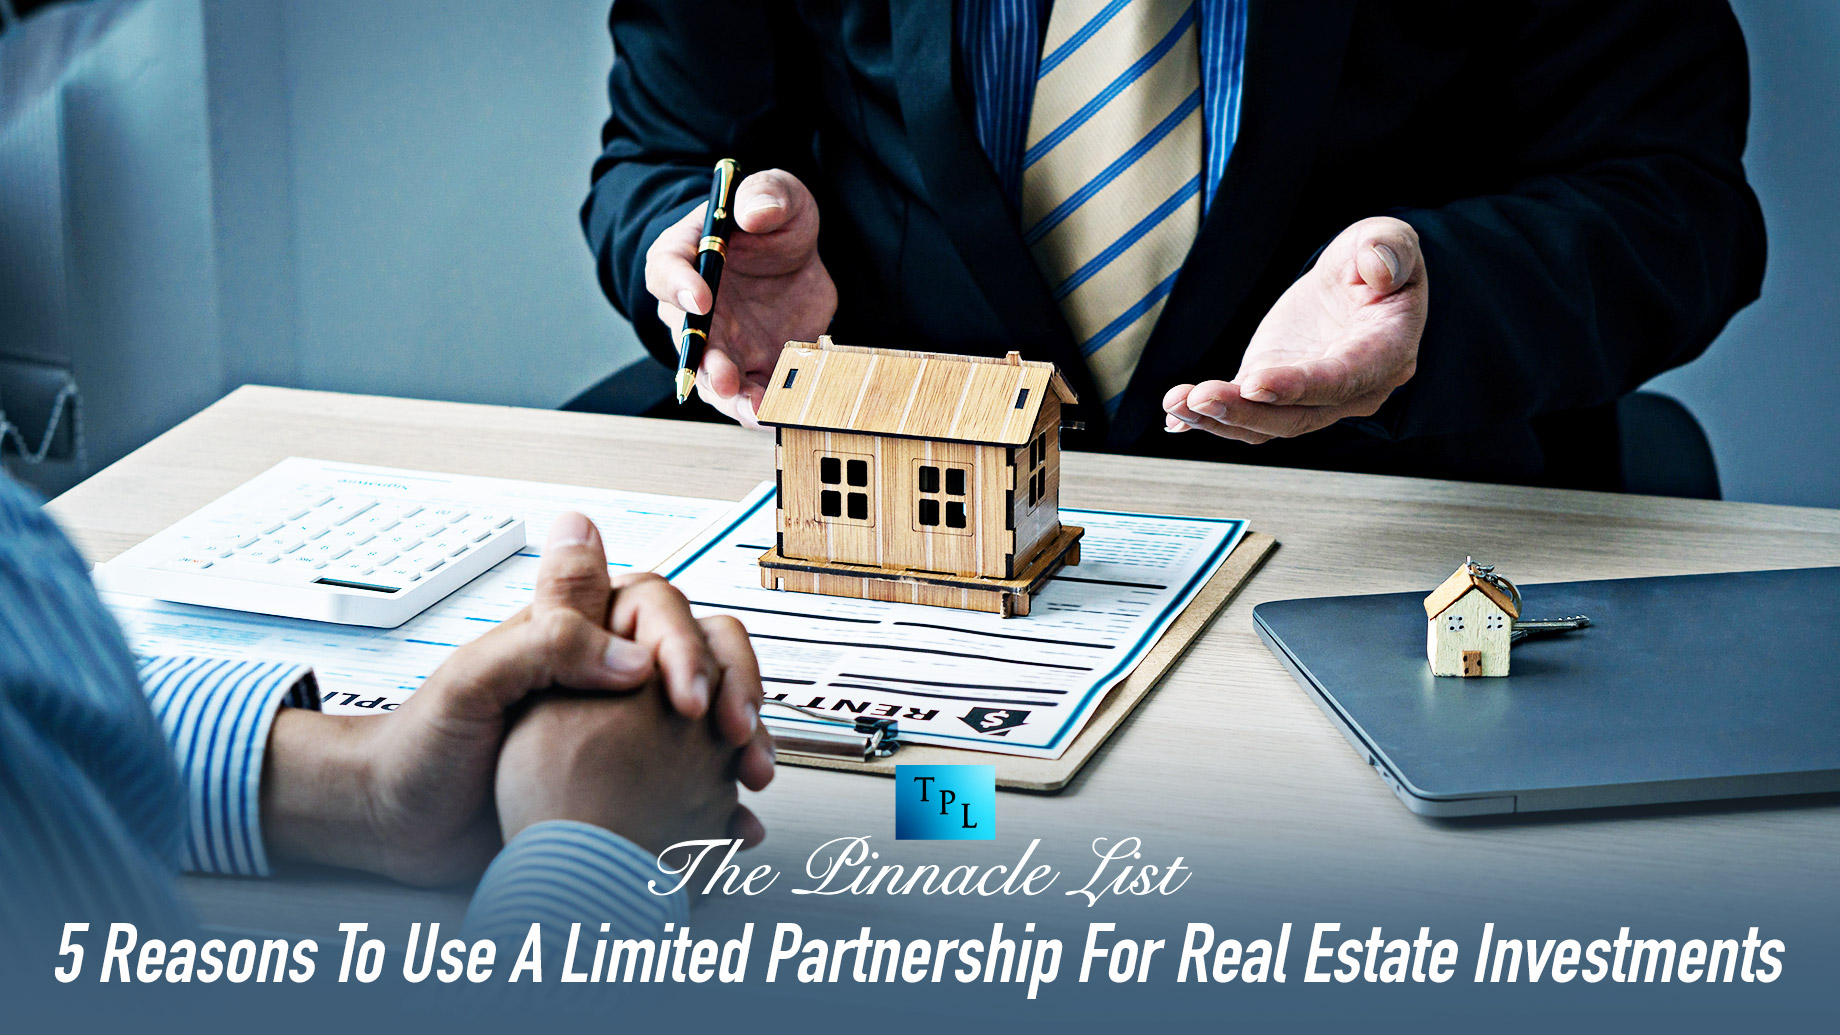 5 Reasons To Use A Limited Partnership For Real Estate Investments